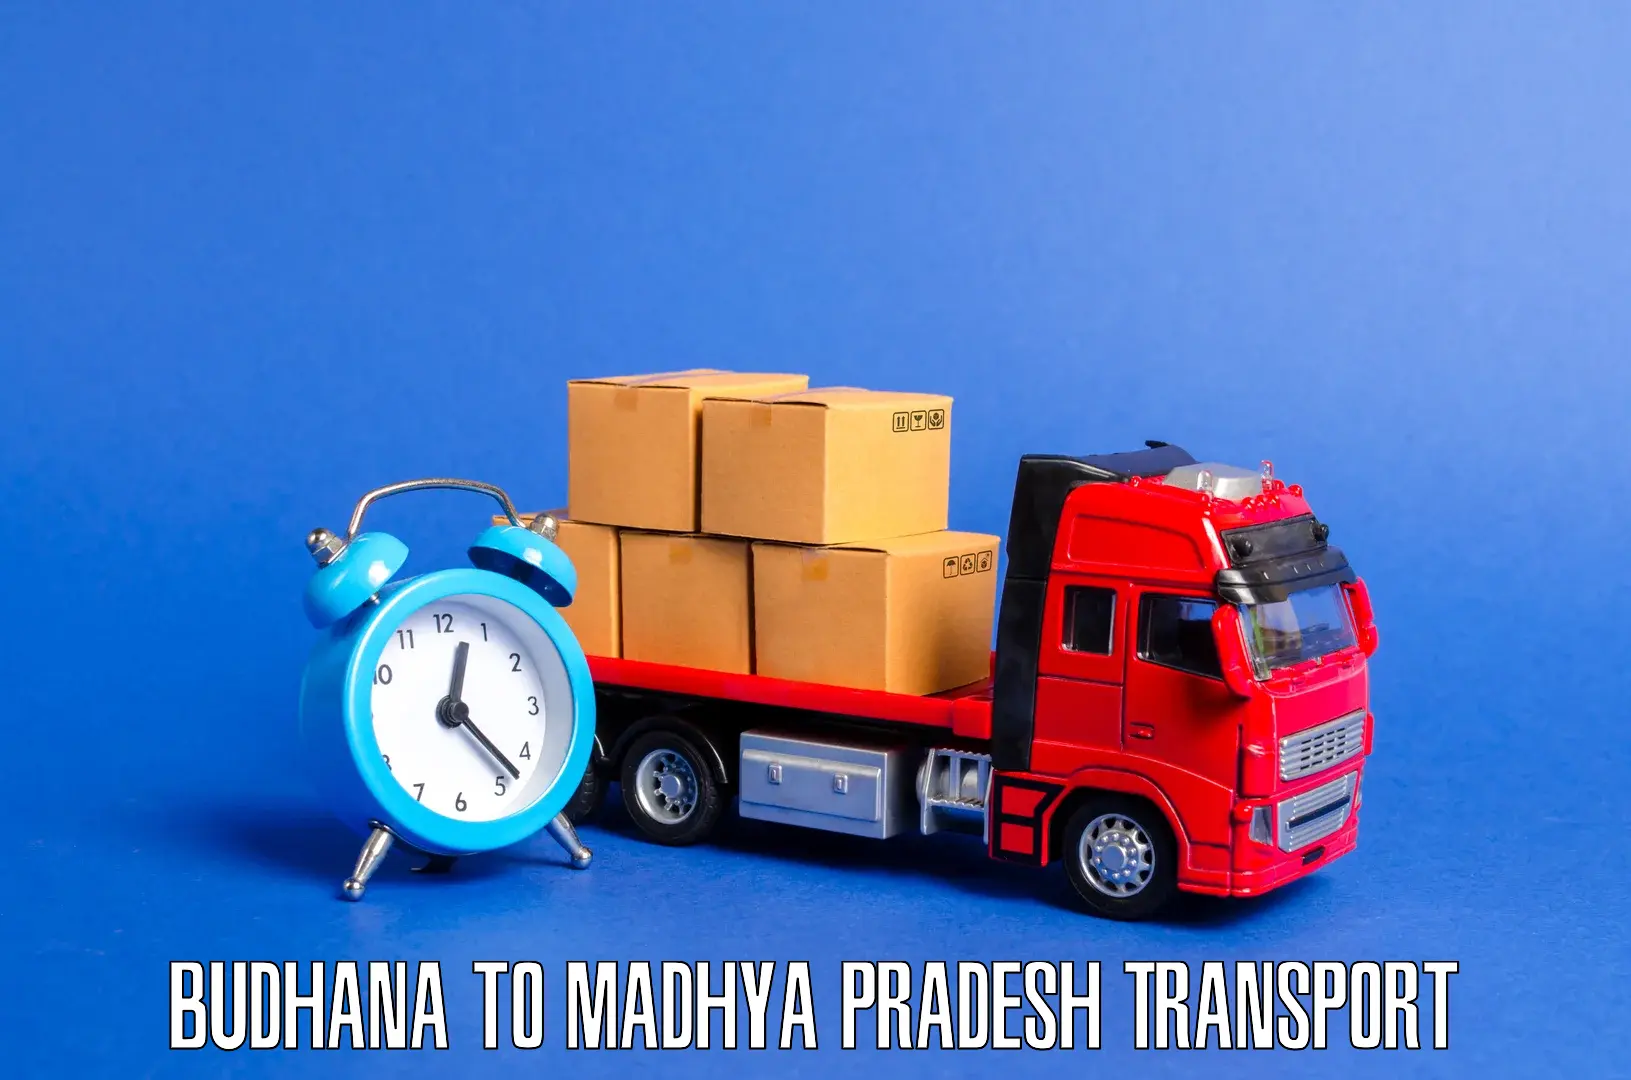 Parcel transport services in Budhana to Jhunku